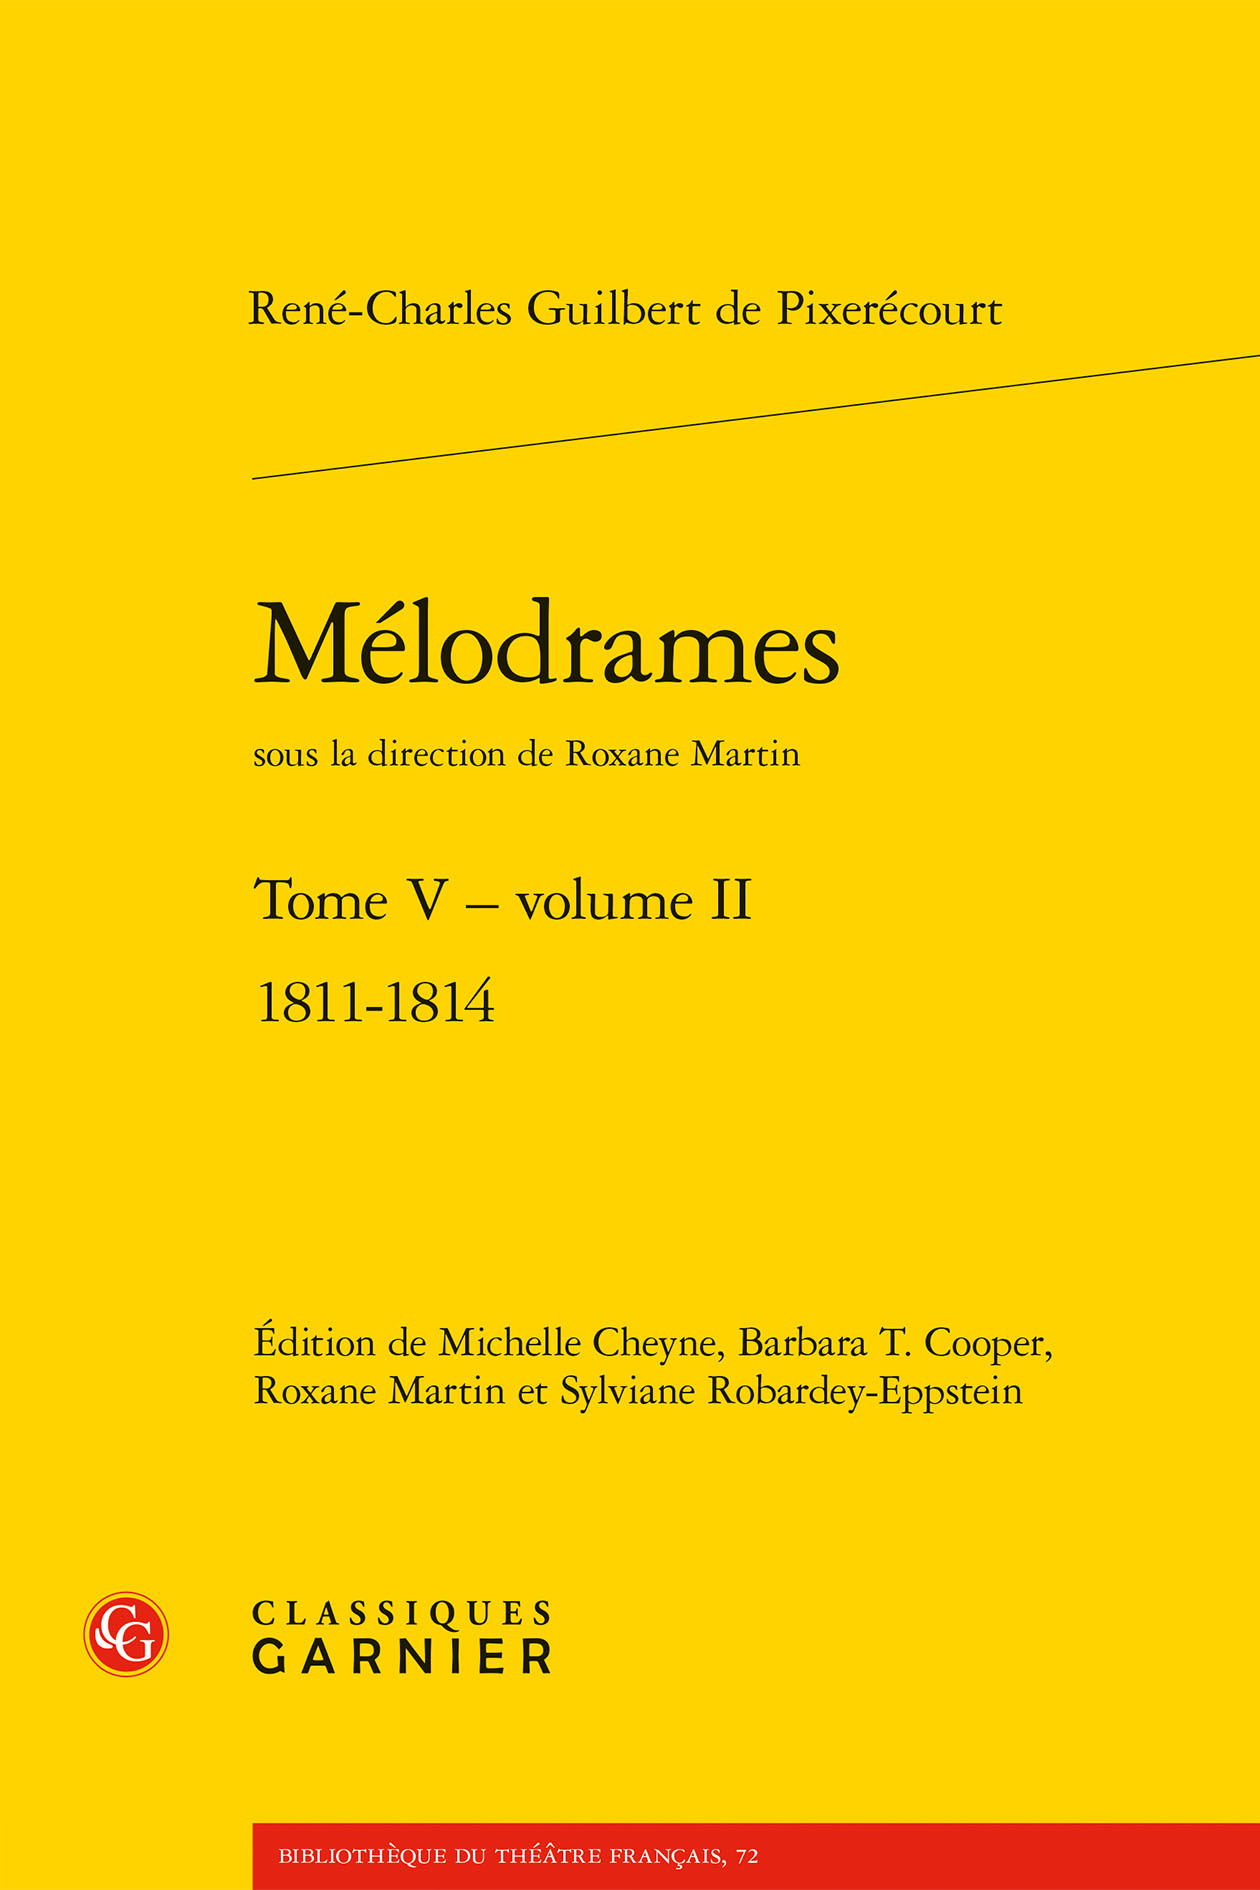 Mélodrames, 1811-1814 (9782406105558-front-cover)